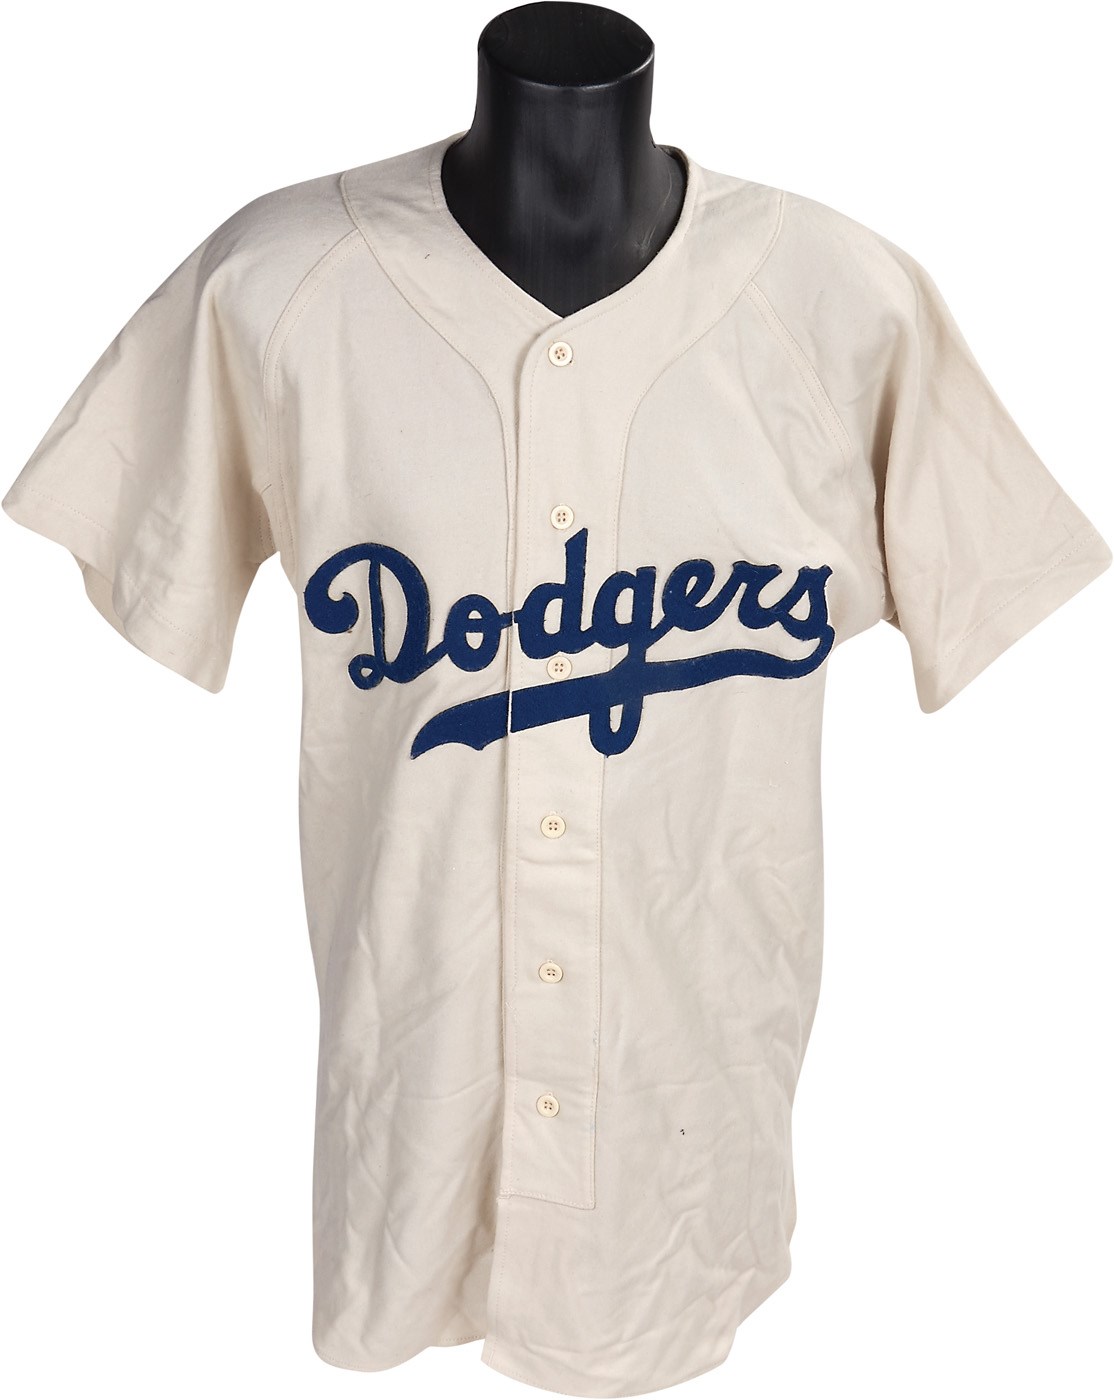 Jackie Robinson & Brooklyn Dodgers - Jackie Robinson "42" Movie Jersey Used in the Film - Signed by Rachel Robinson